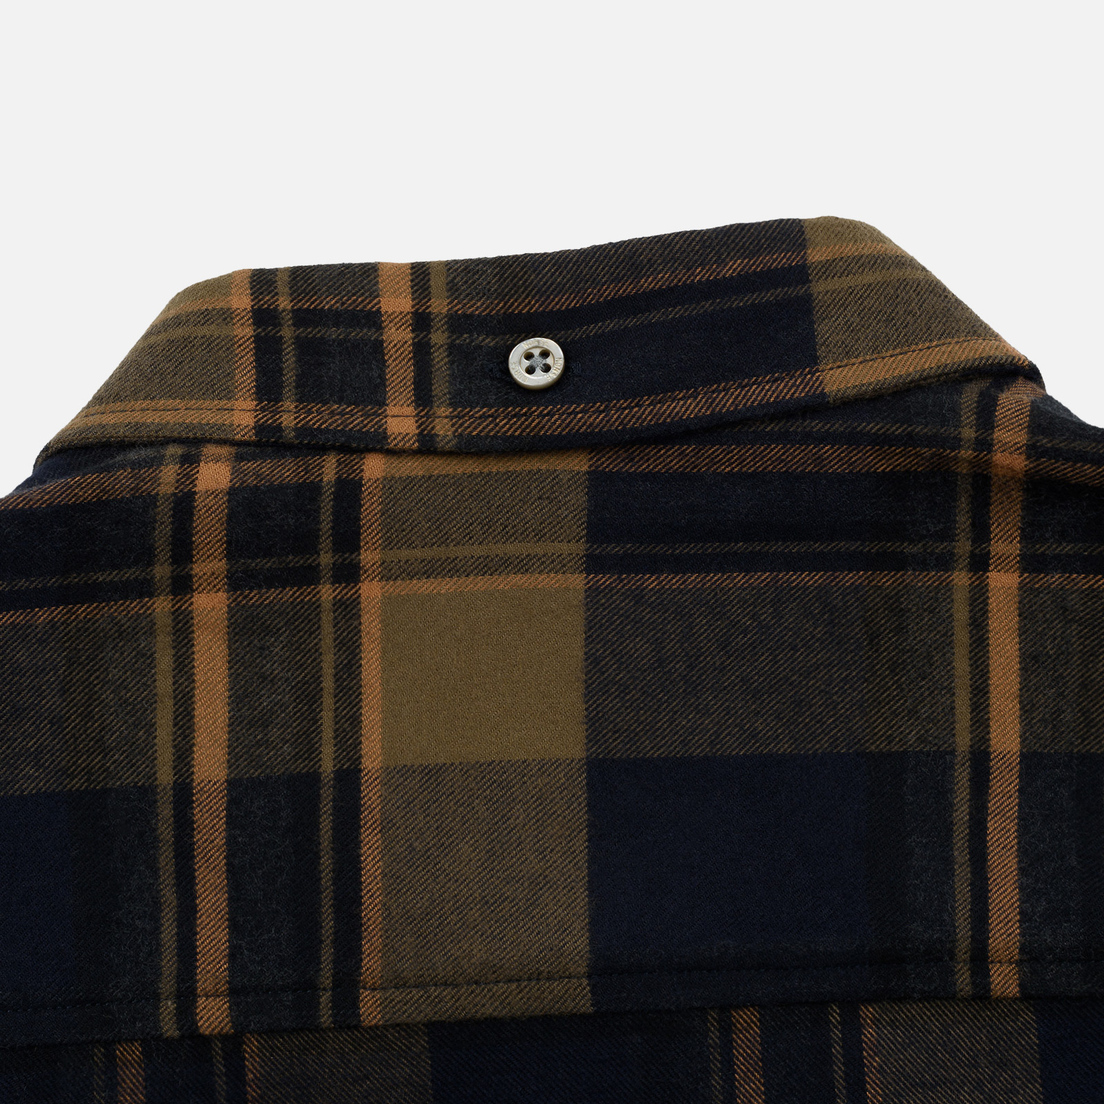 Norse Projects Мужская рубашка Anton Brushed Flannel Check